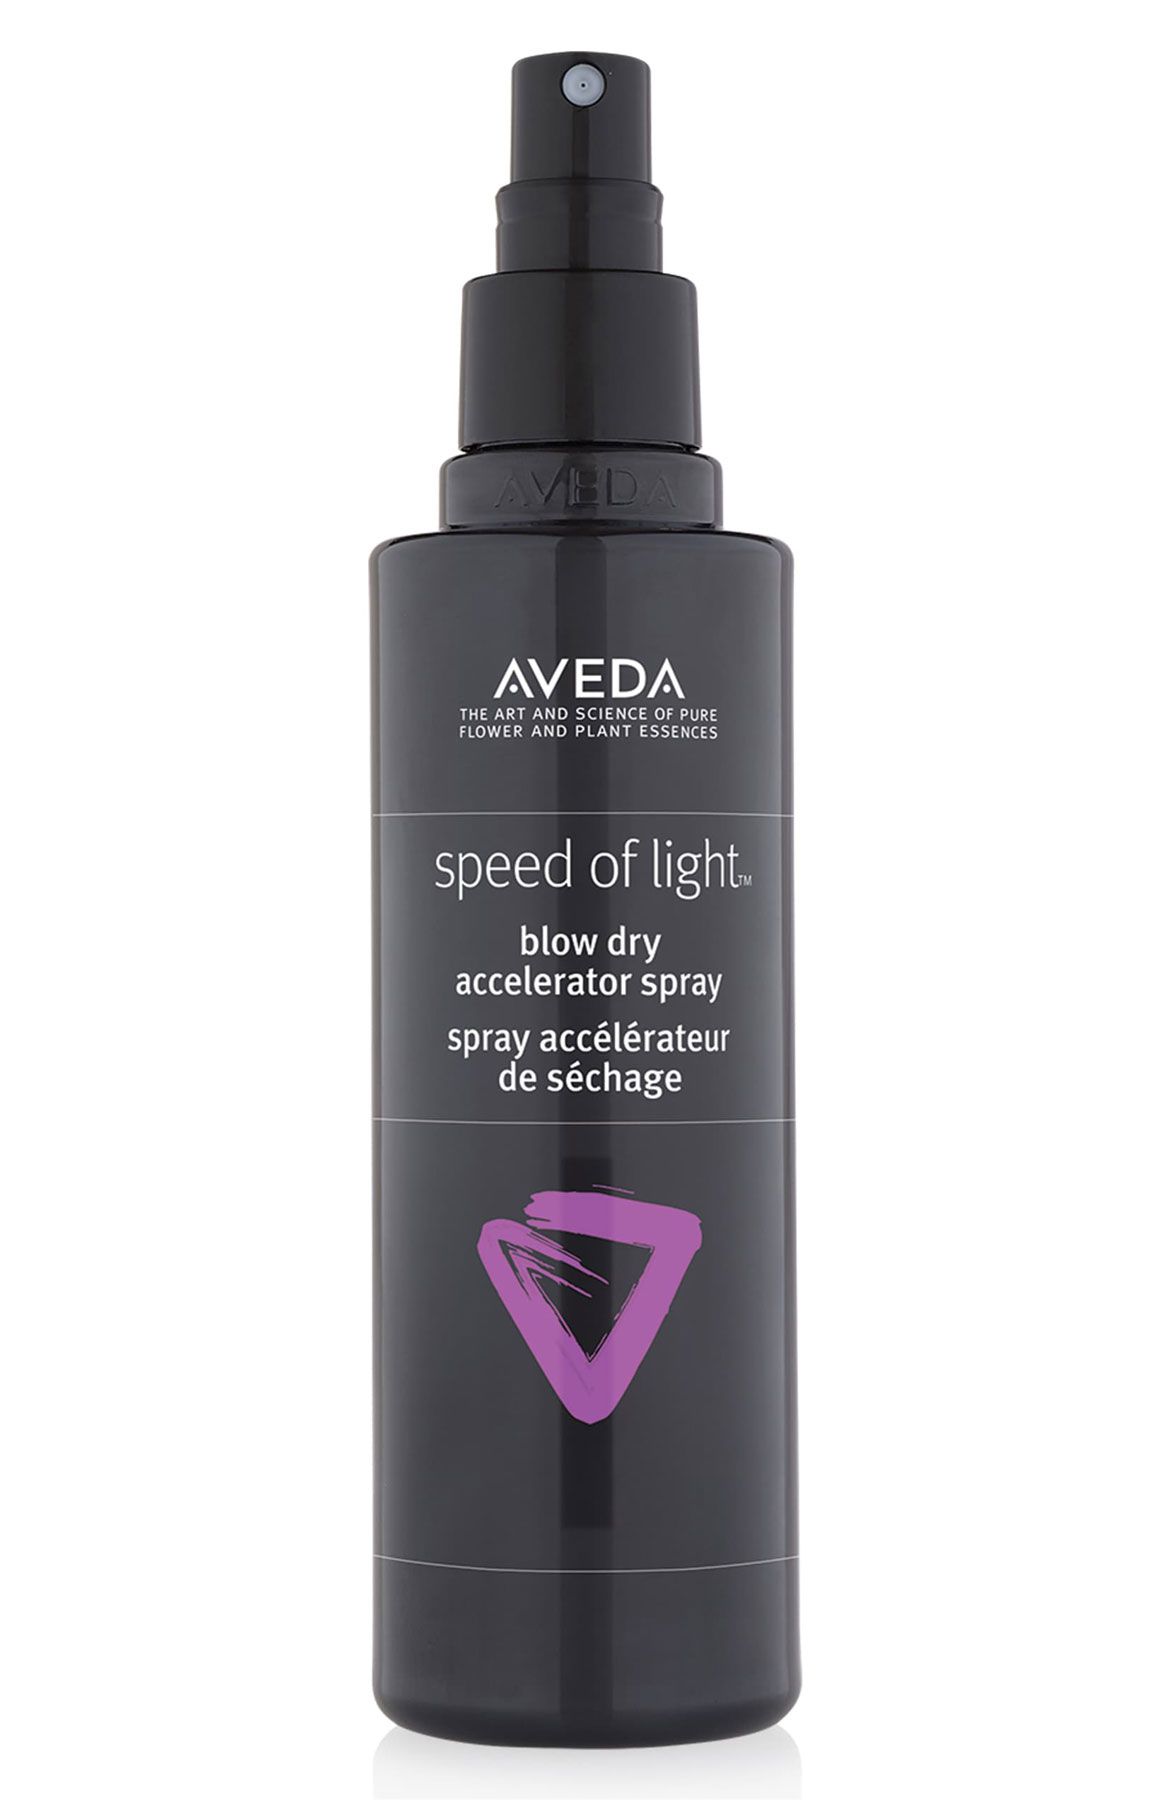 Cleverest Items 2020 – Aveda Speed ​​of Light Blow Dry Accelerator Spray